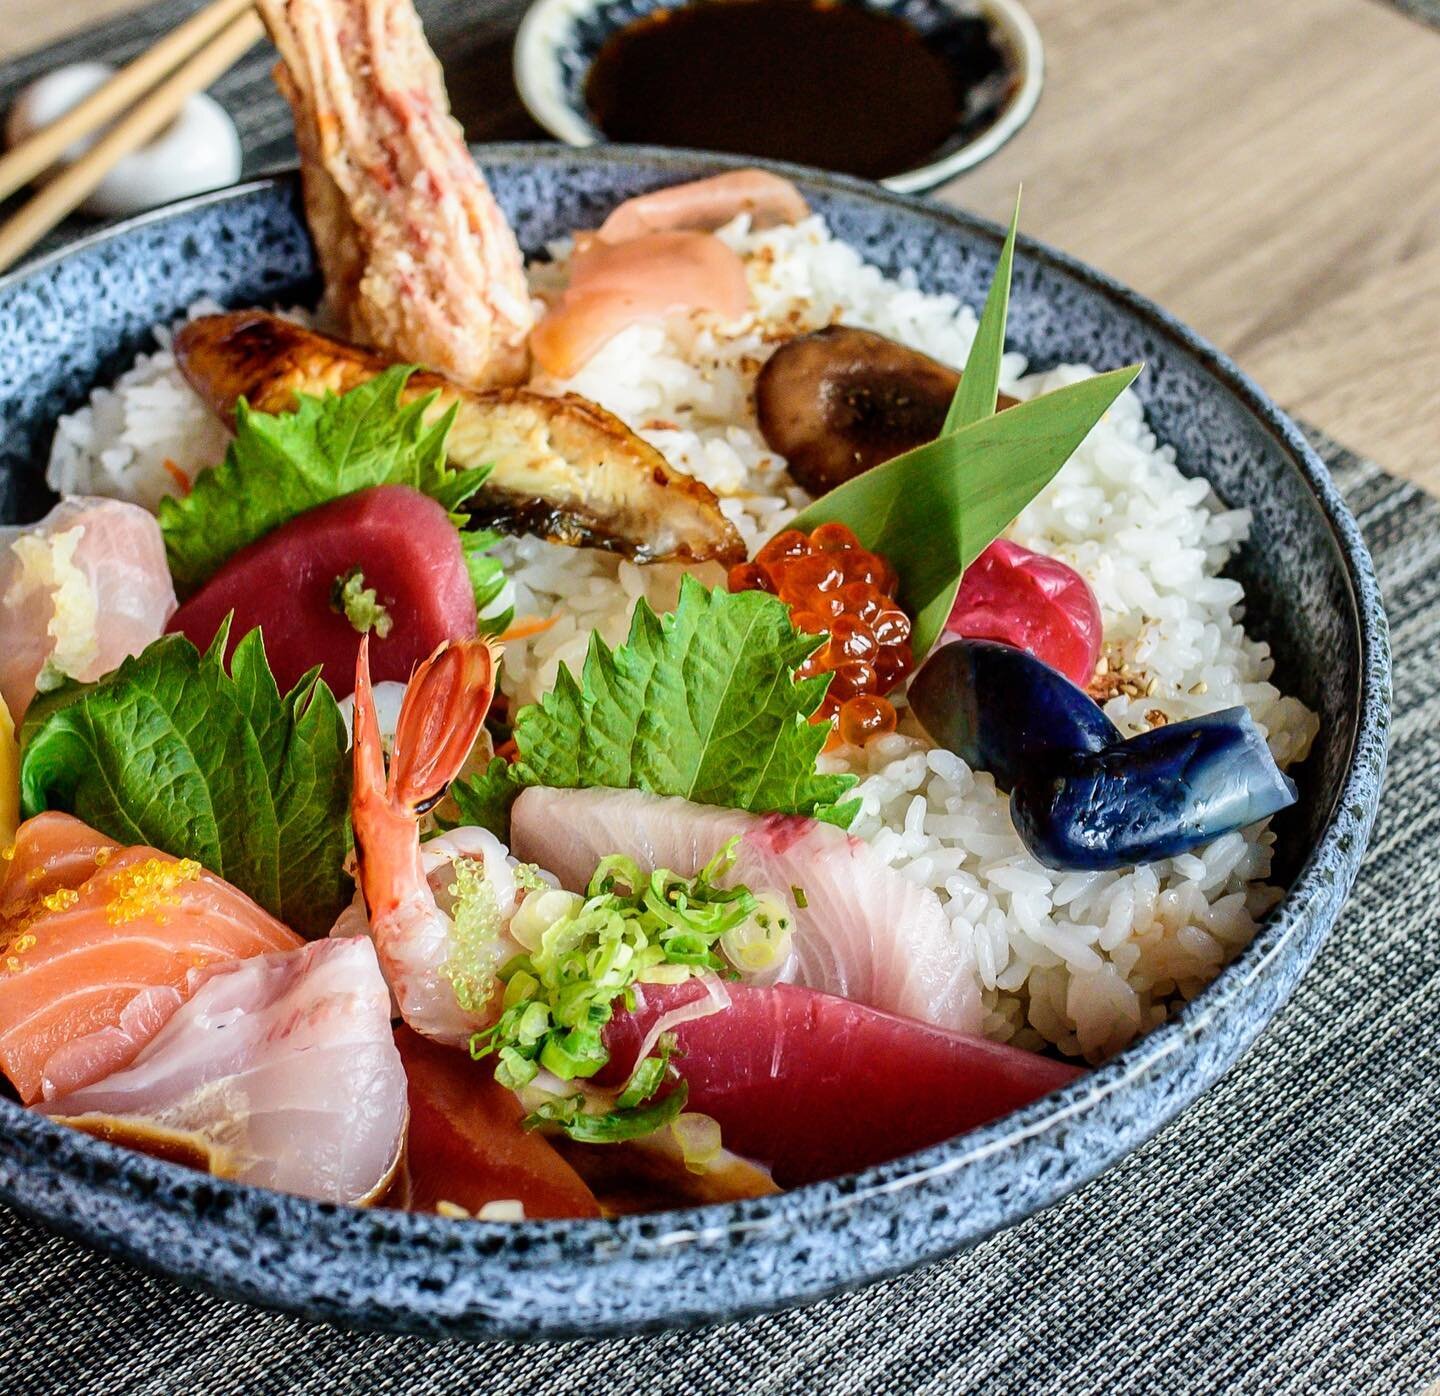 Lunchtime calls for chirashi - available starting at 11:30AM! Join us for dine-in or indulge via pickup and delivery to start the weekend off strong.